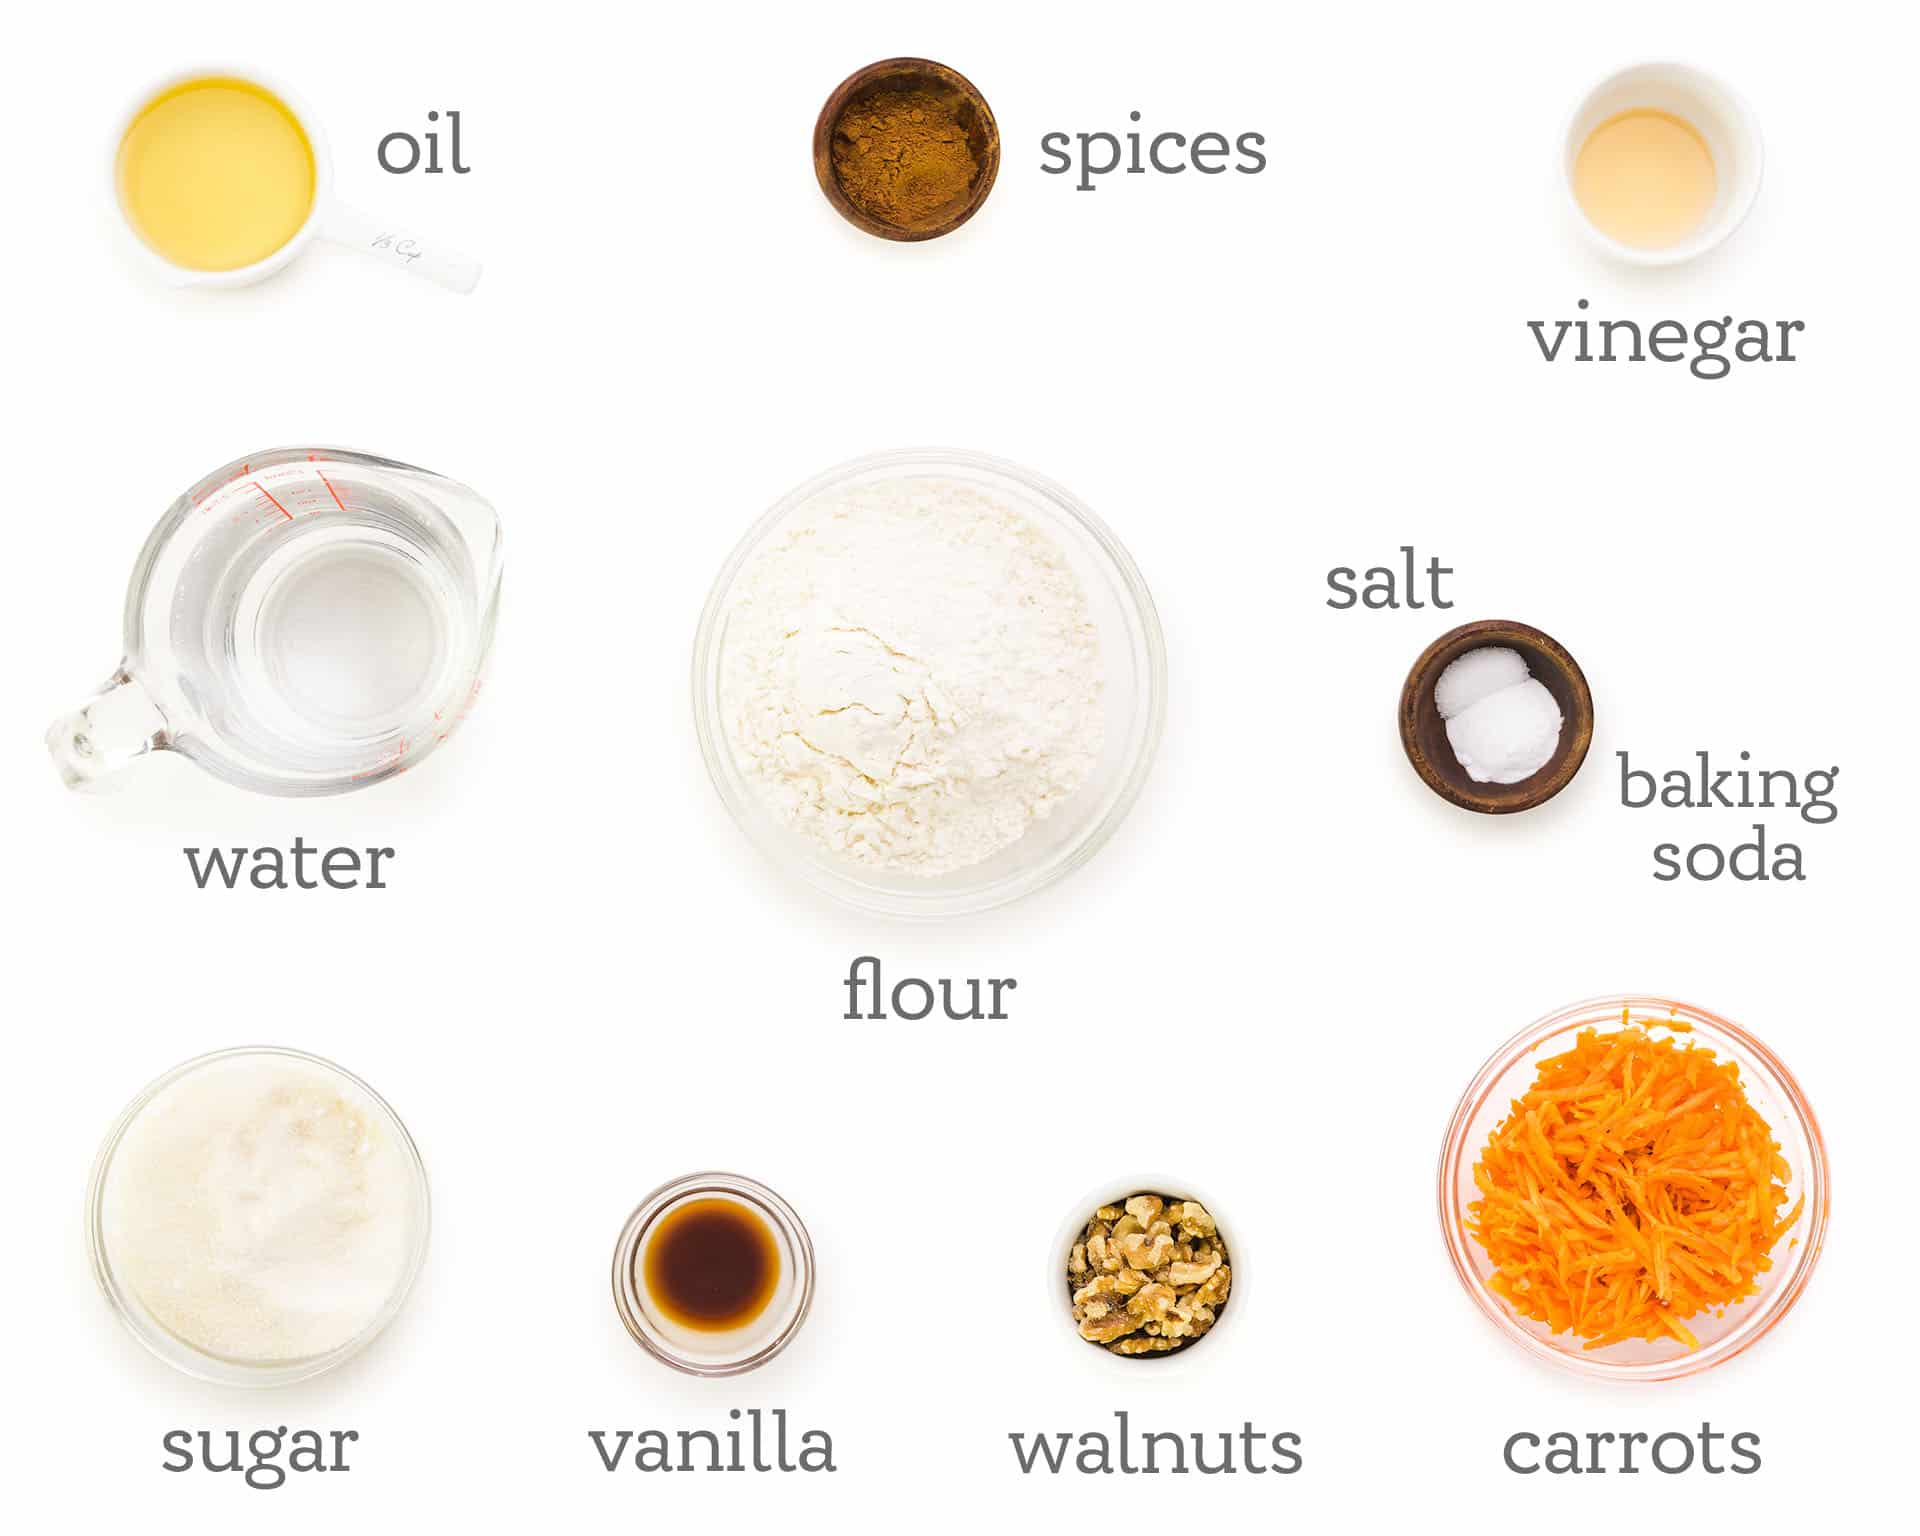 Ingredients are laid out on a white background. The text  reads, spices, vinegar, salt, baking soda, carrots, walnuts, vanilla, sugar, water, oil, and flour.